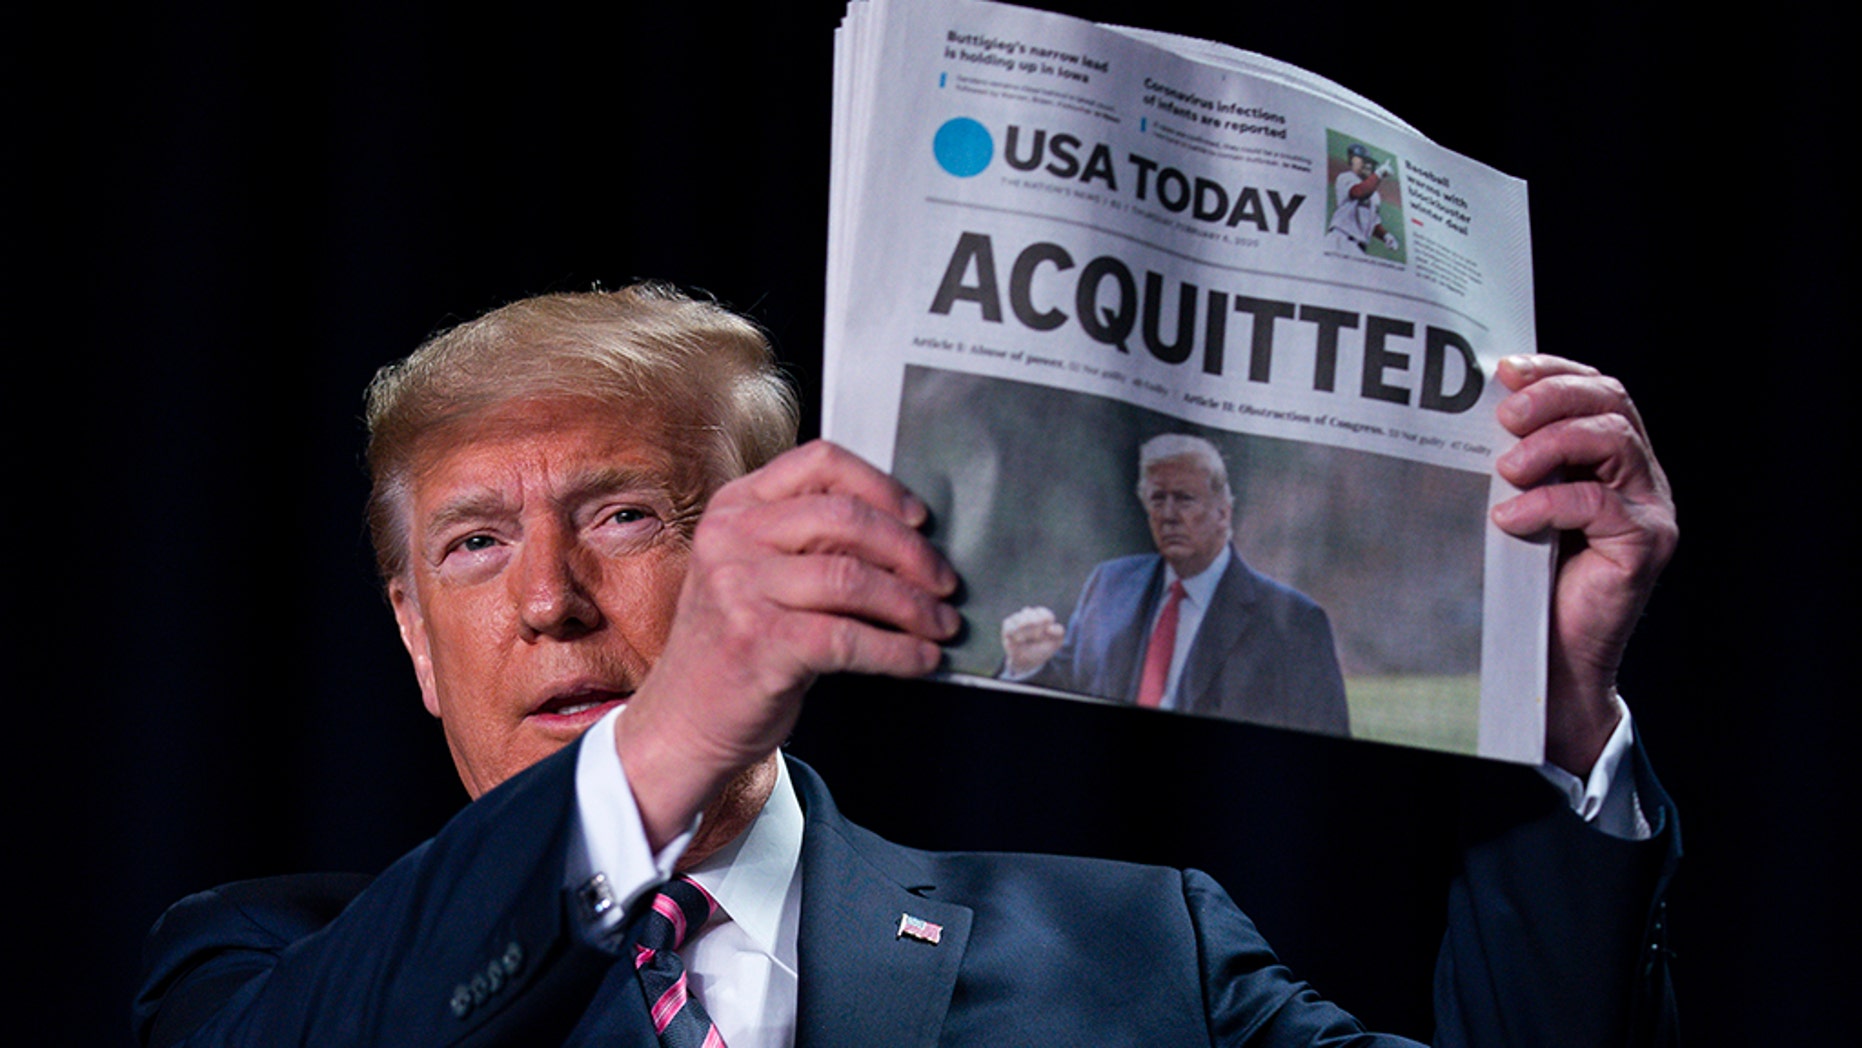 Trump proudly displays 'Acquitted' headlines, mere feet from Pelosi at